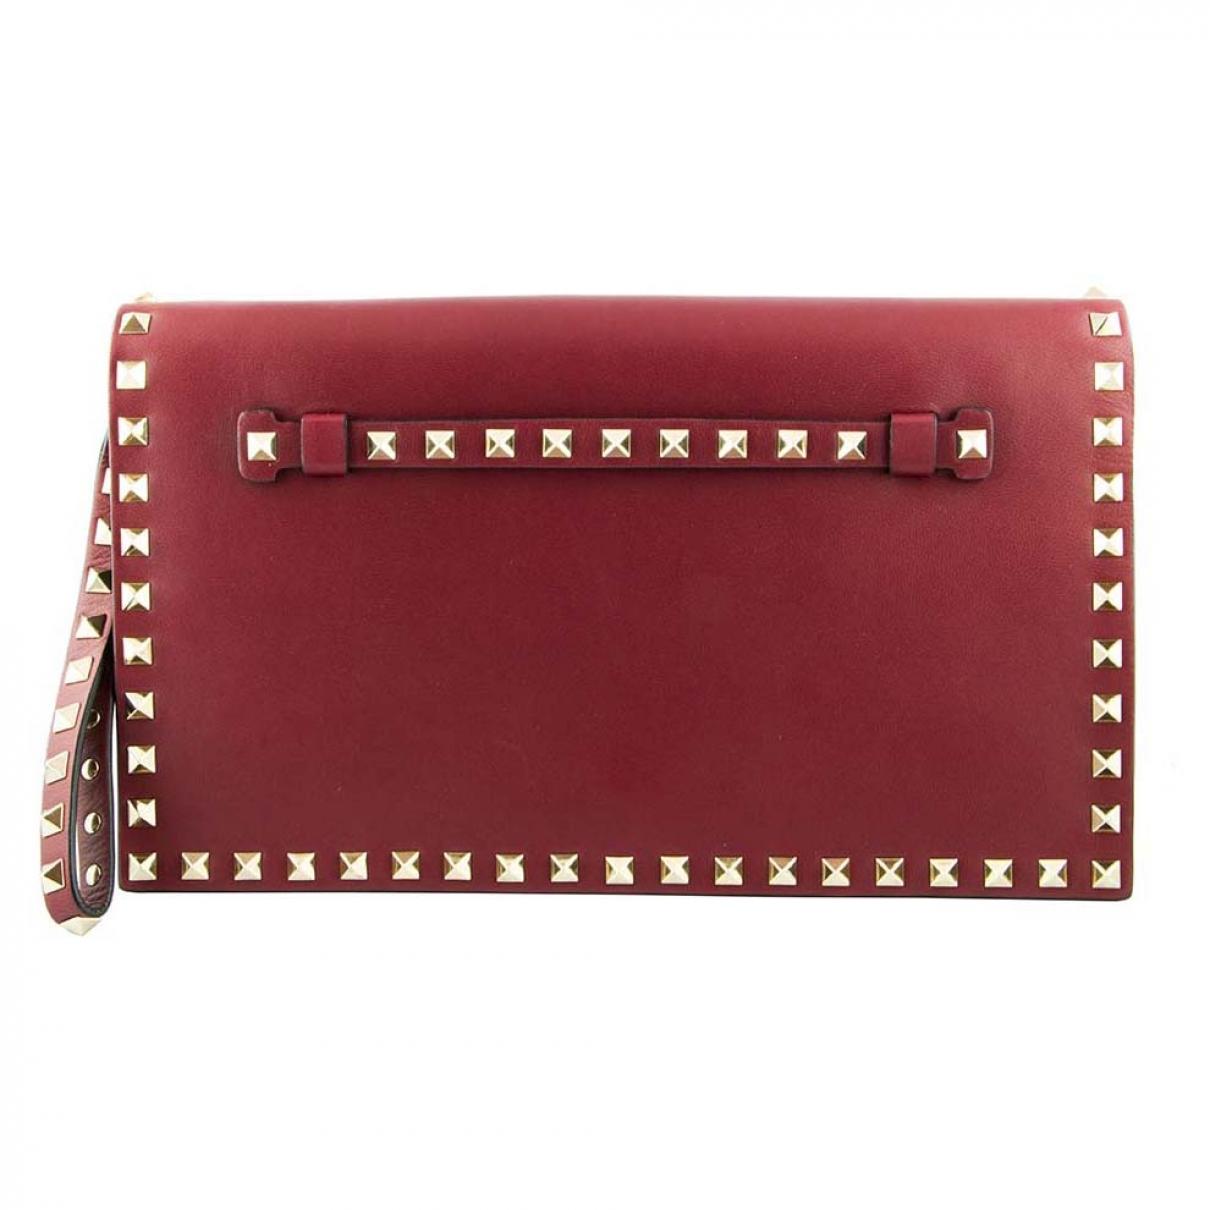 Valentino Leather Clutch Bag in Red - Lyst